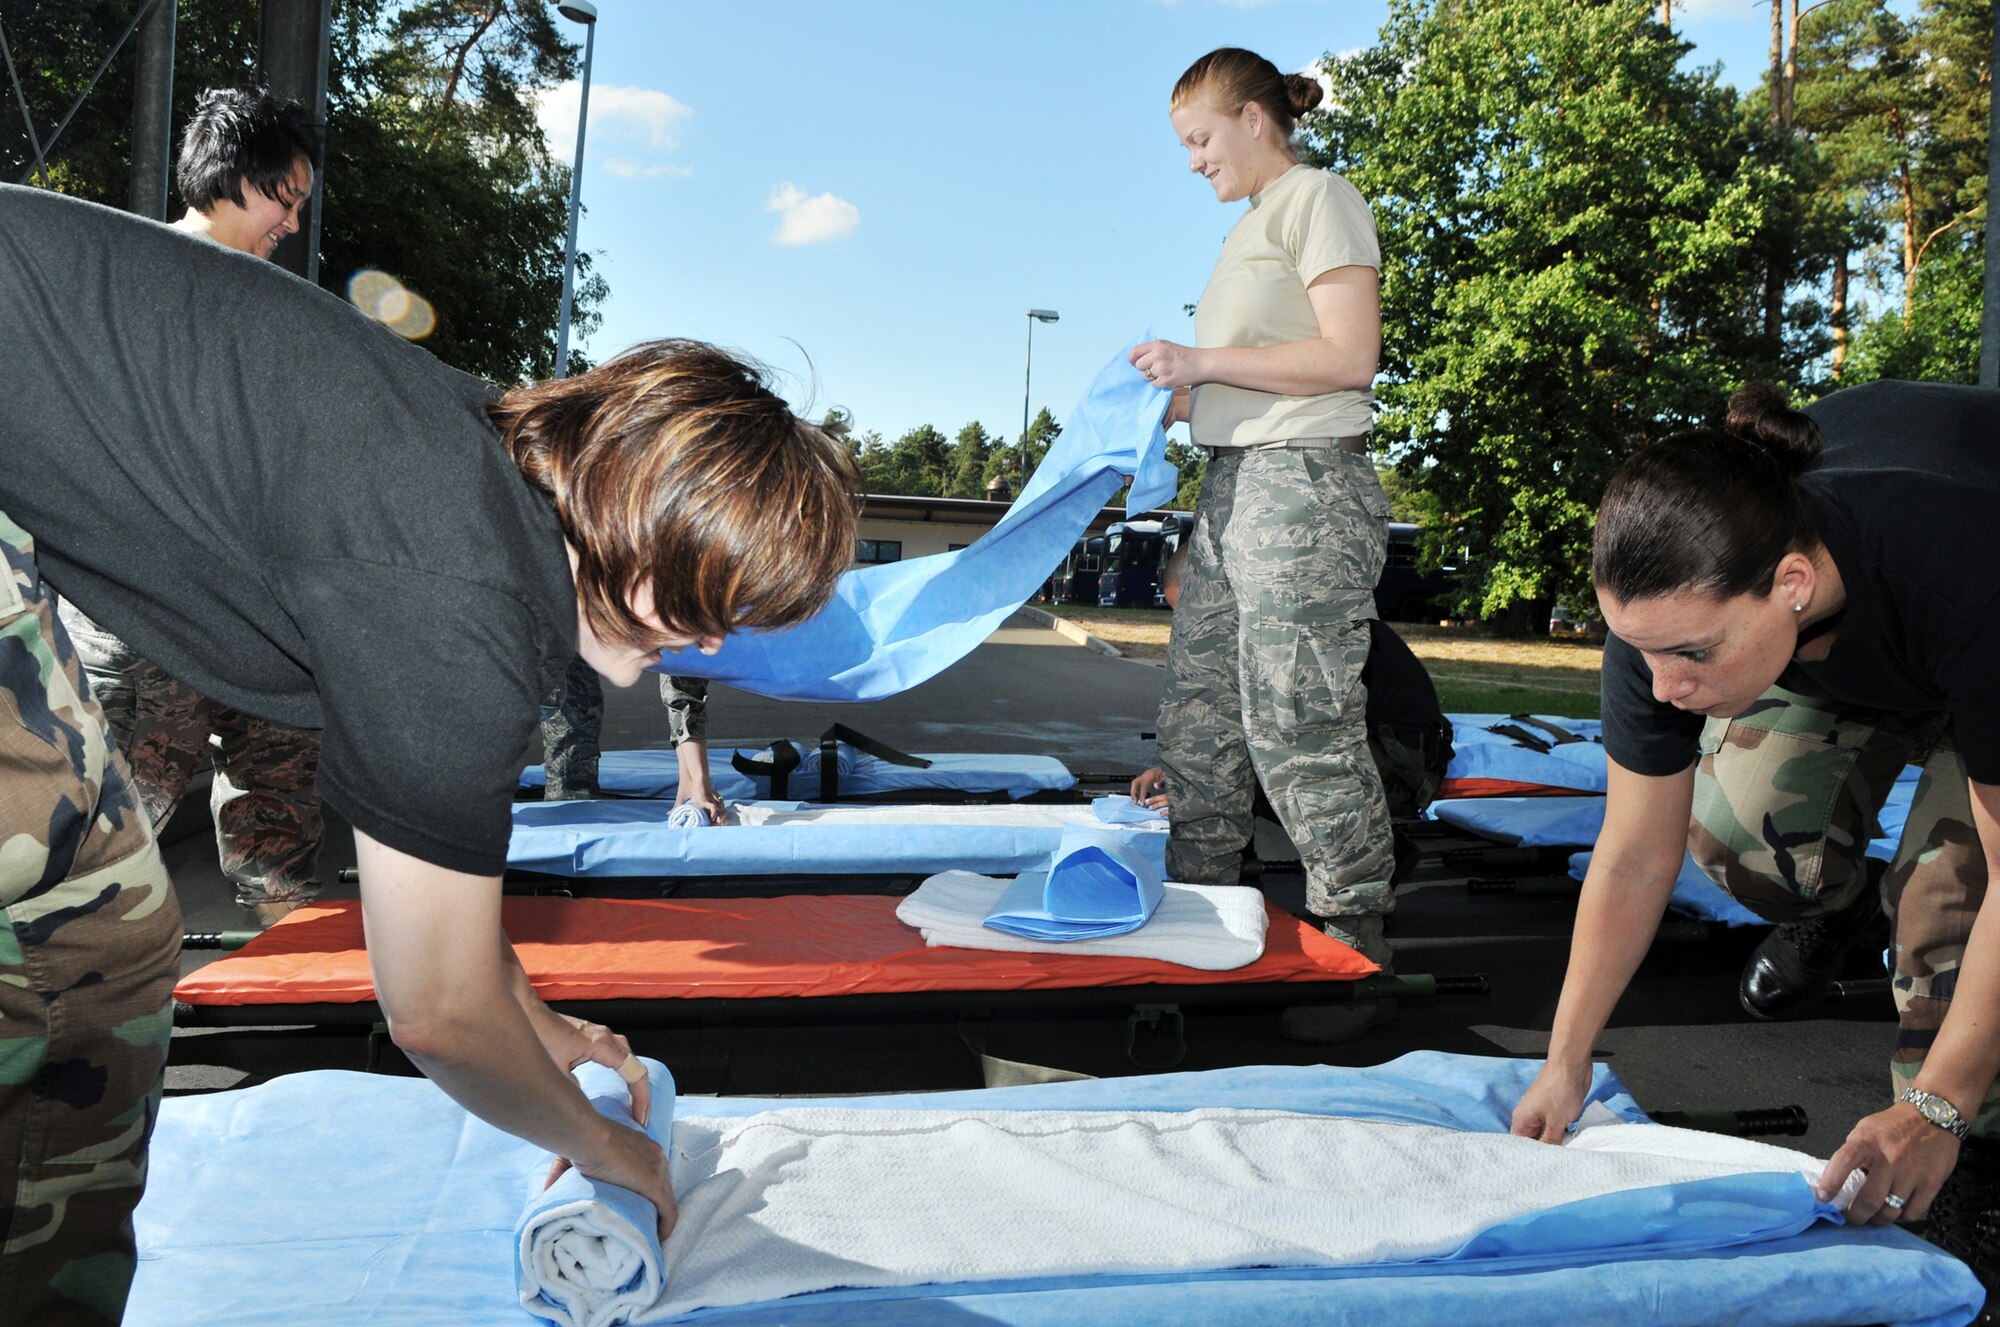 Tech. Sgt. Christina Werkin (from left to right starting in the front) , Tech. Sgt. Laura Small, Staff Sgt. Frances Sturdevant and Senior Airman Lisa Kennedy prepare gurneys Aug. 27, 2009, Ramstein Air Base, Germany. The gurneys will be used to transport wounded warriors to an aircraft taking them to Walter Reid Medical Center in Washington, D.C., for further medical treatment. The Airmen are 86th Contingency Aeromedical Staging Facility medical technicians. (U.S. Air Force photo/Senior Airman Nathan Lipscomb) 